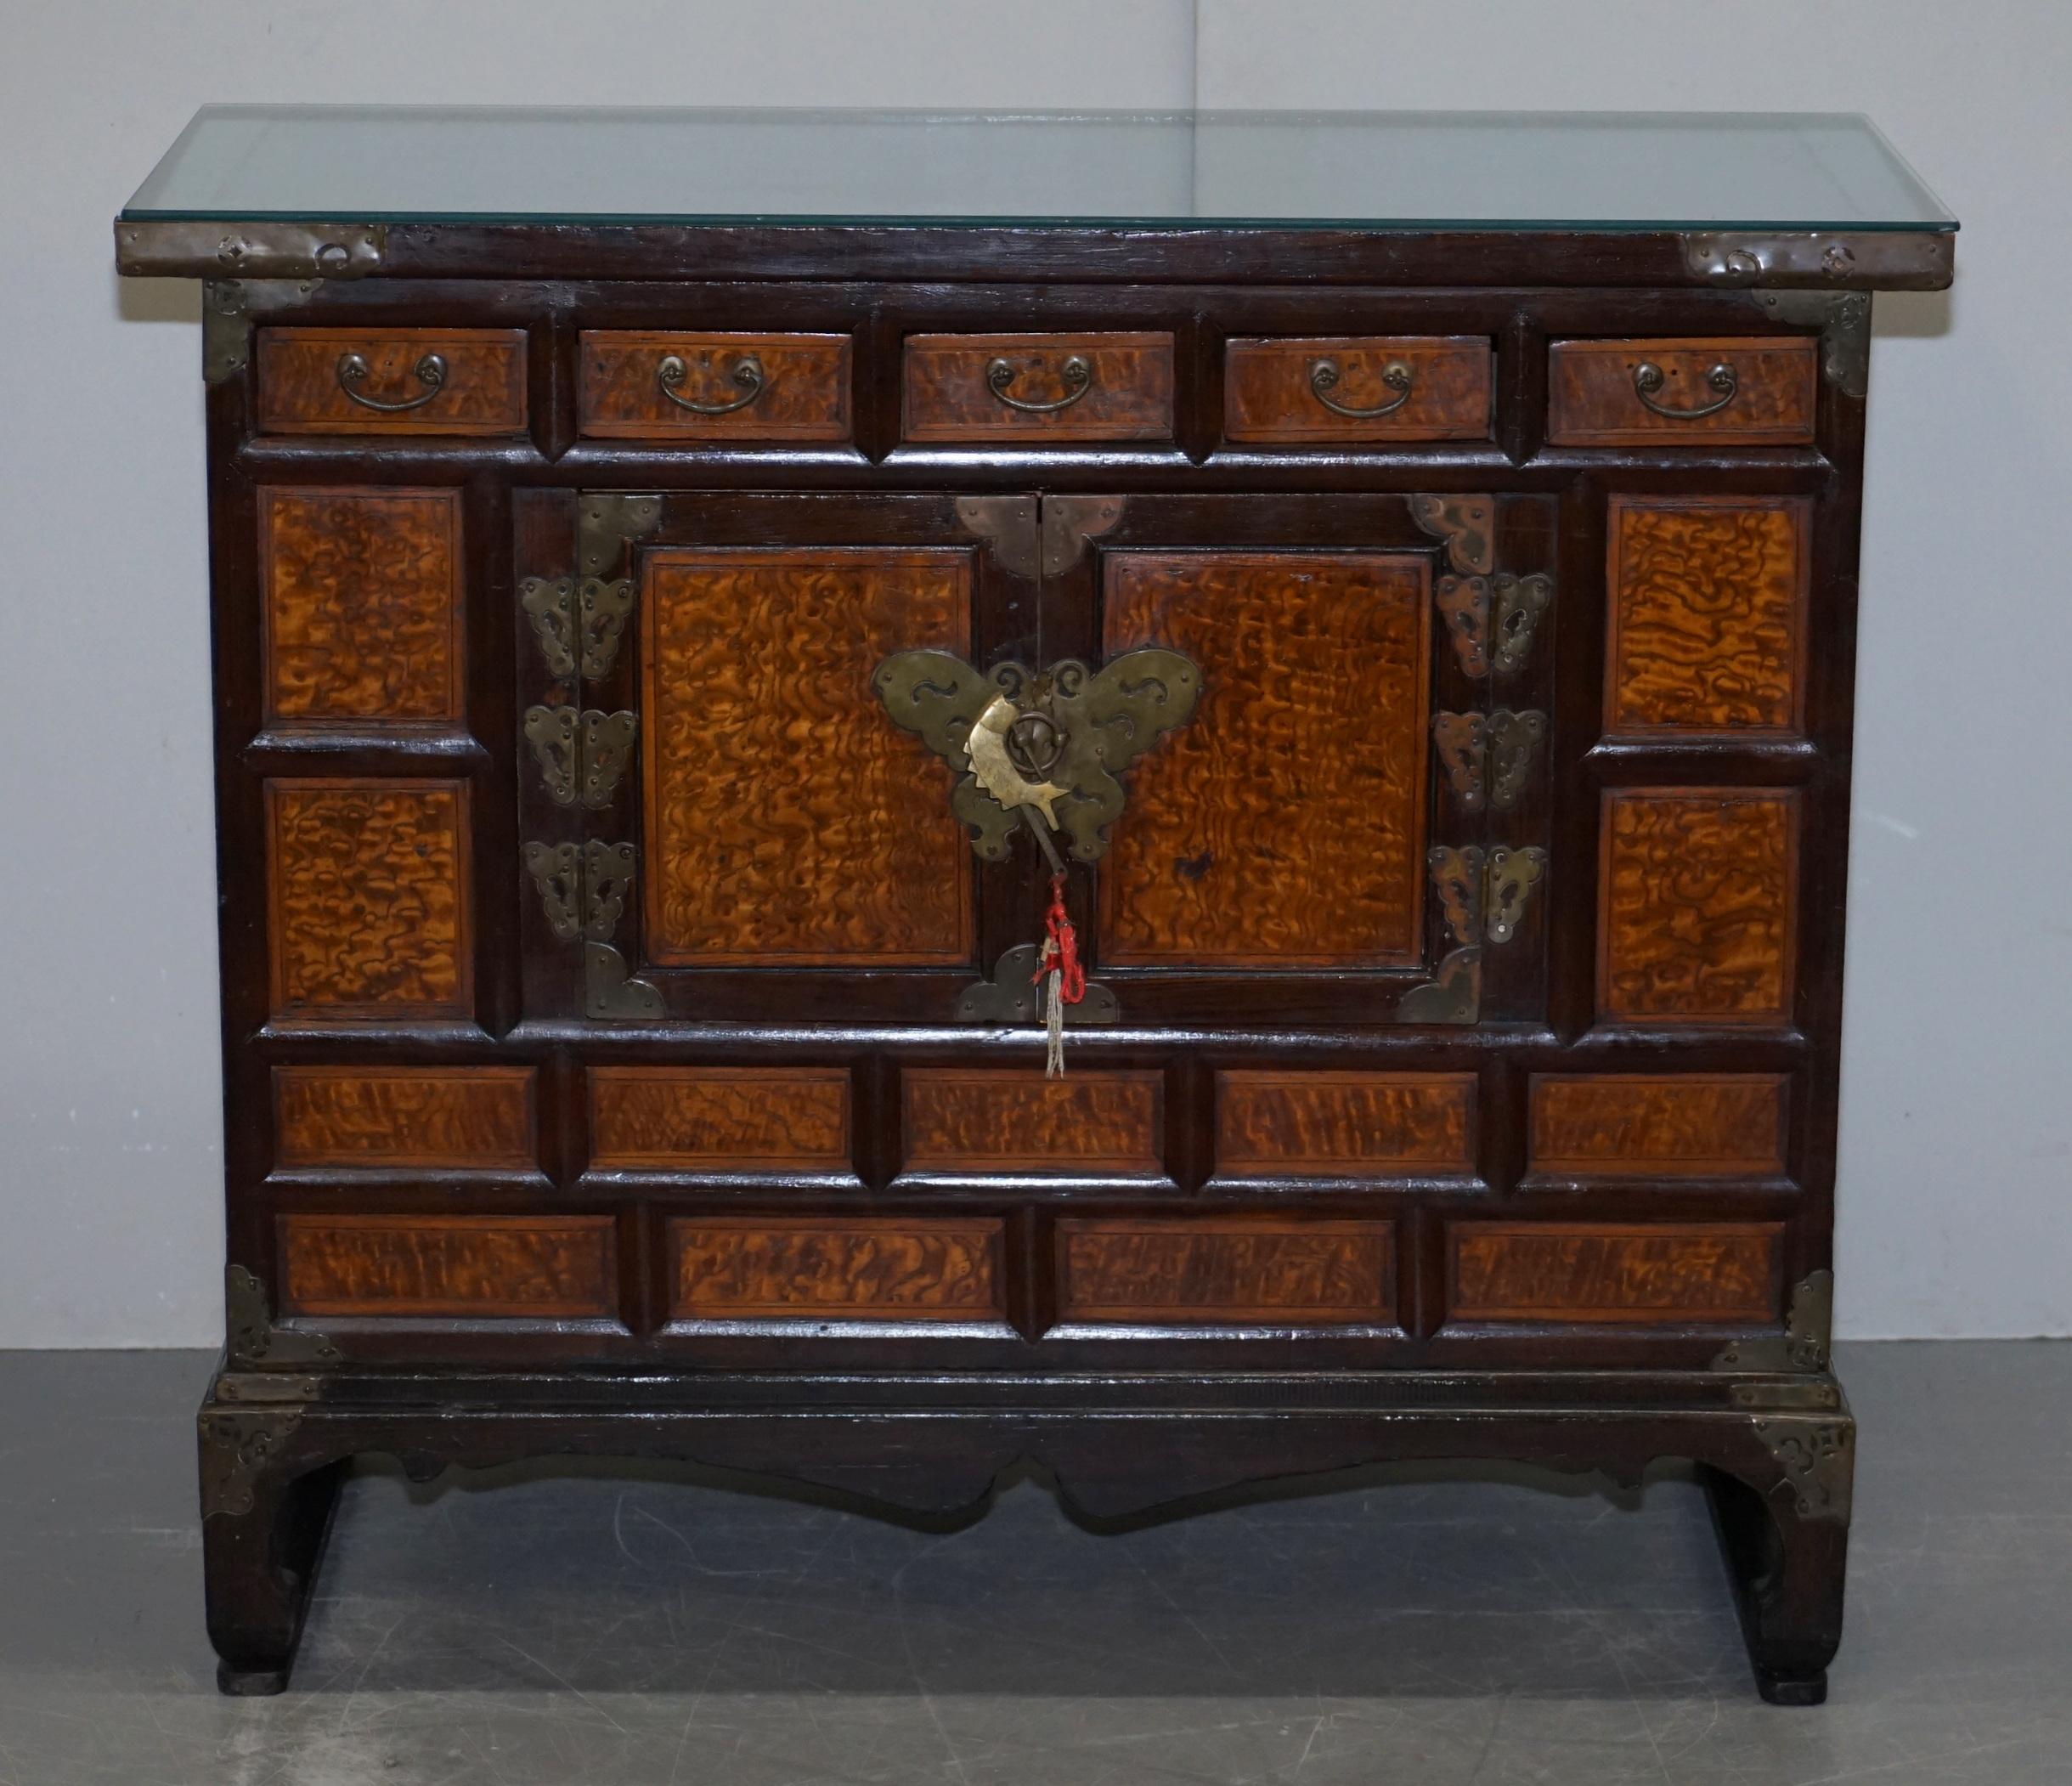 We are delighted to offer for sale this lovely circa 1900 Chinese Export burr elm sideboard

A very good looking and well made decorative antique piece, the timber patina is sublime, the hinges are all hand hammered and engraved butterfly’s which